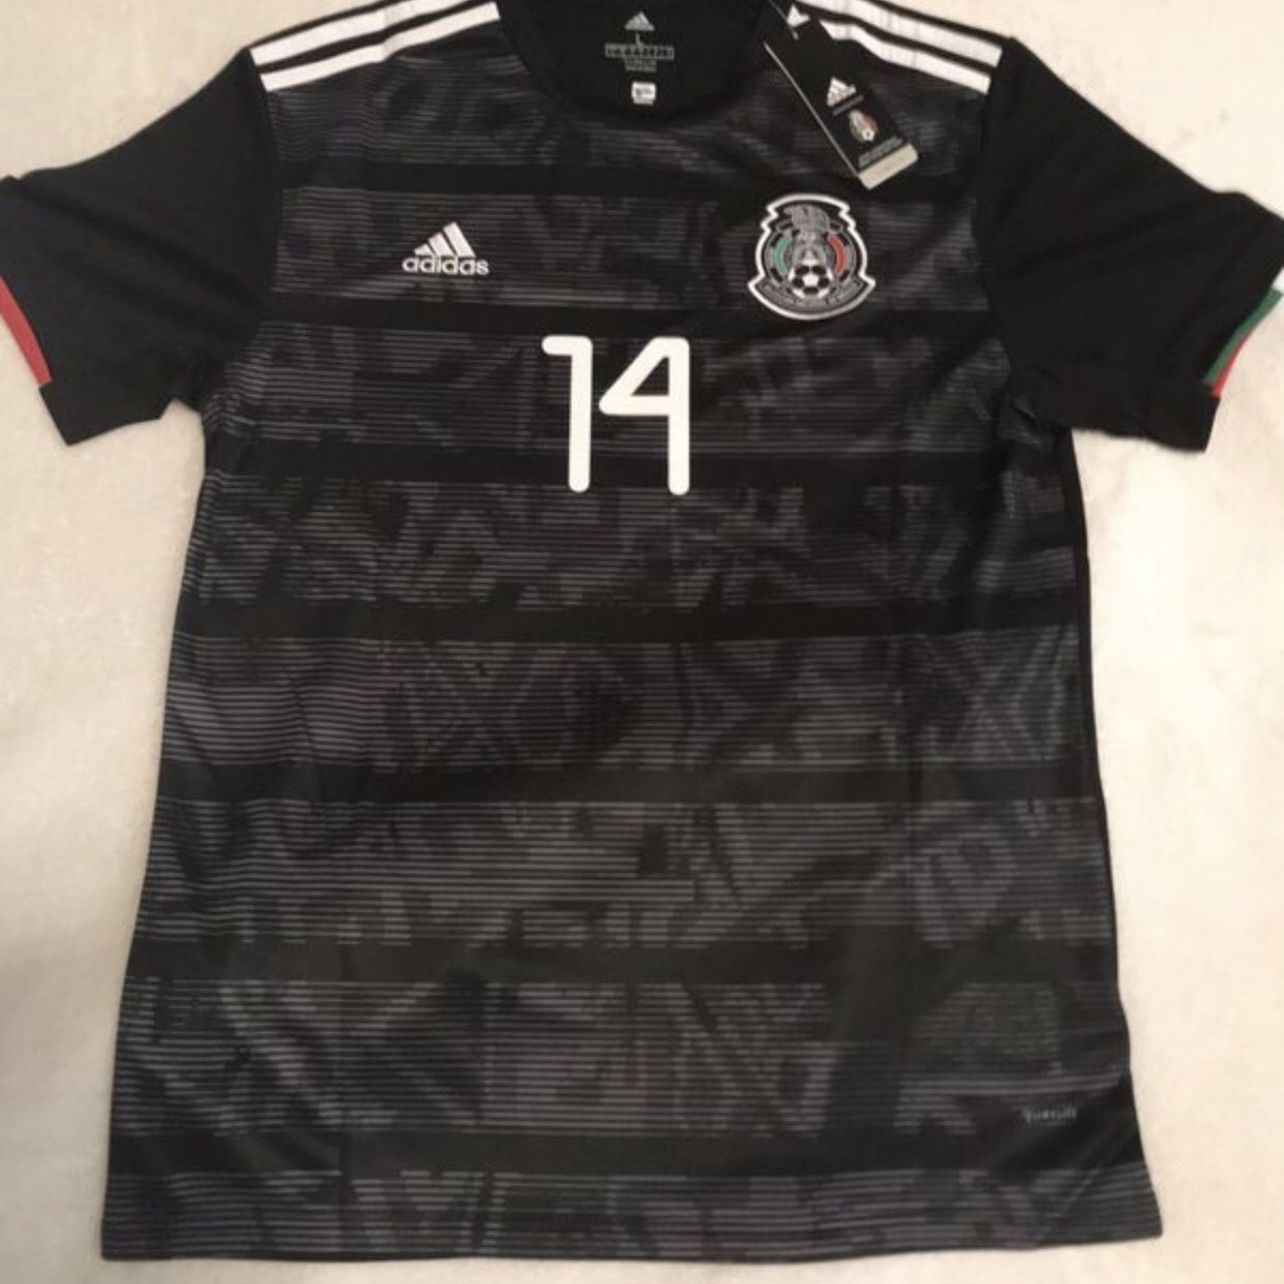 Mexico Chicharito 2014 Home Jersey for Sale in Lincoln Acres, CA - OfferUp